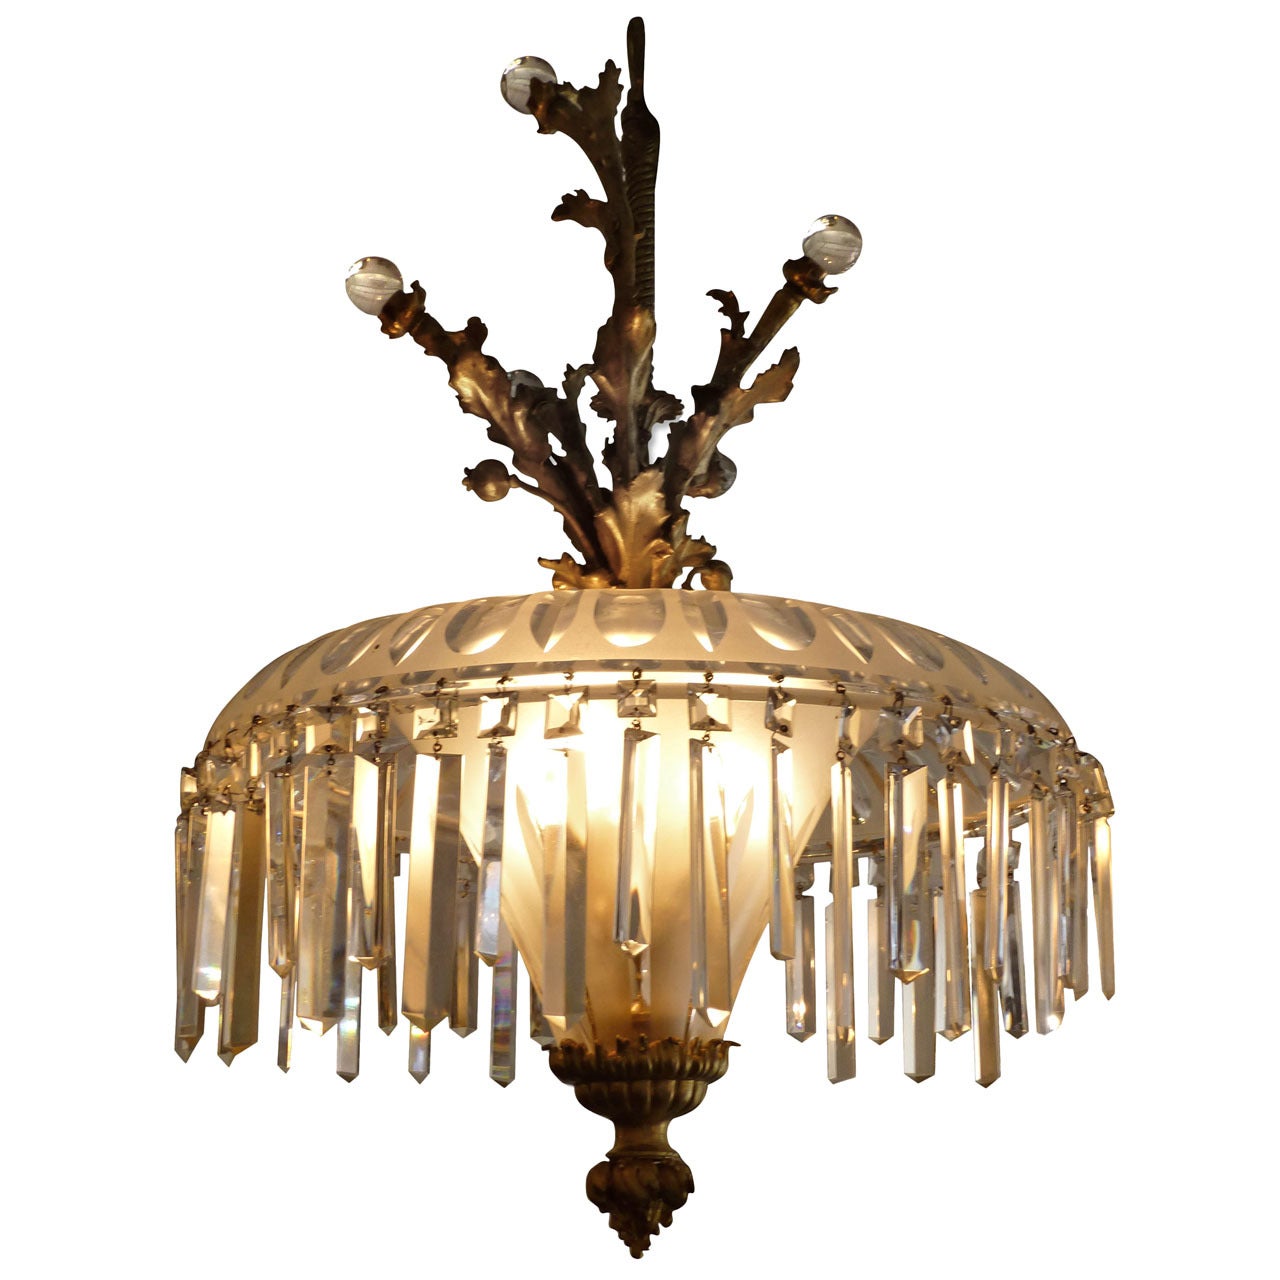 1885 French Doré Bronze and Crystal Chandelier from Palace Hotel in NYC